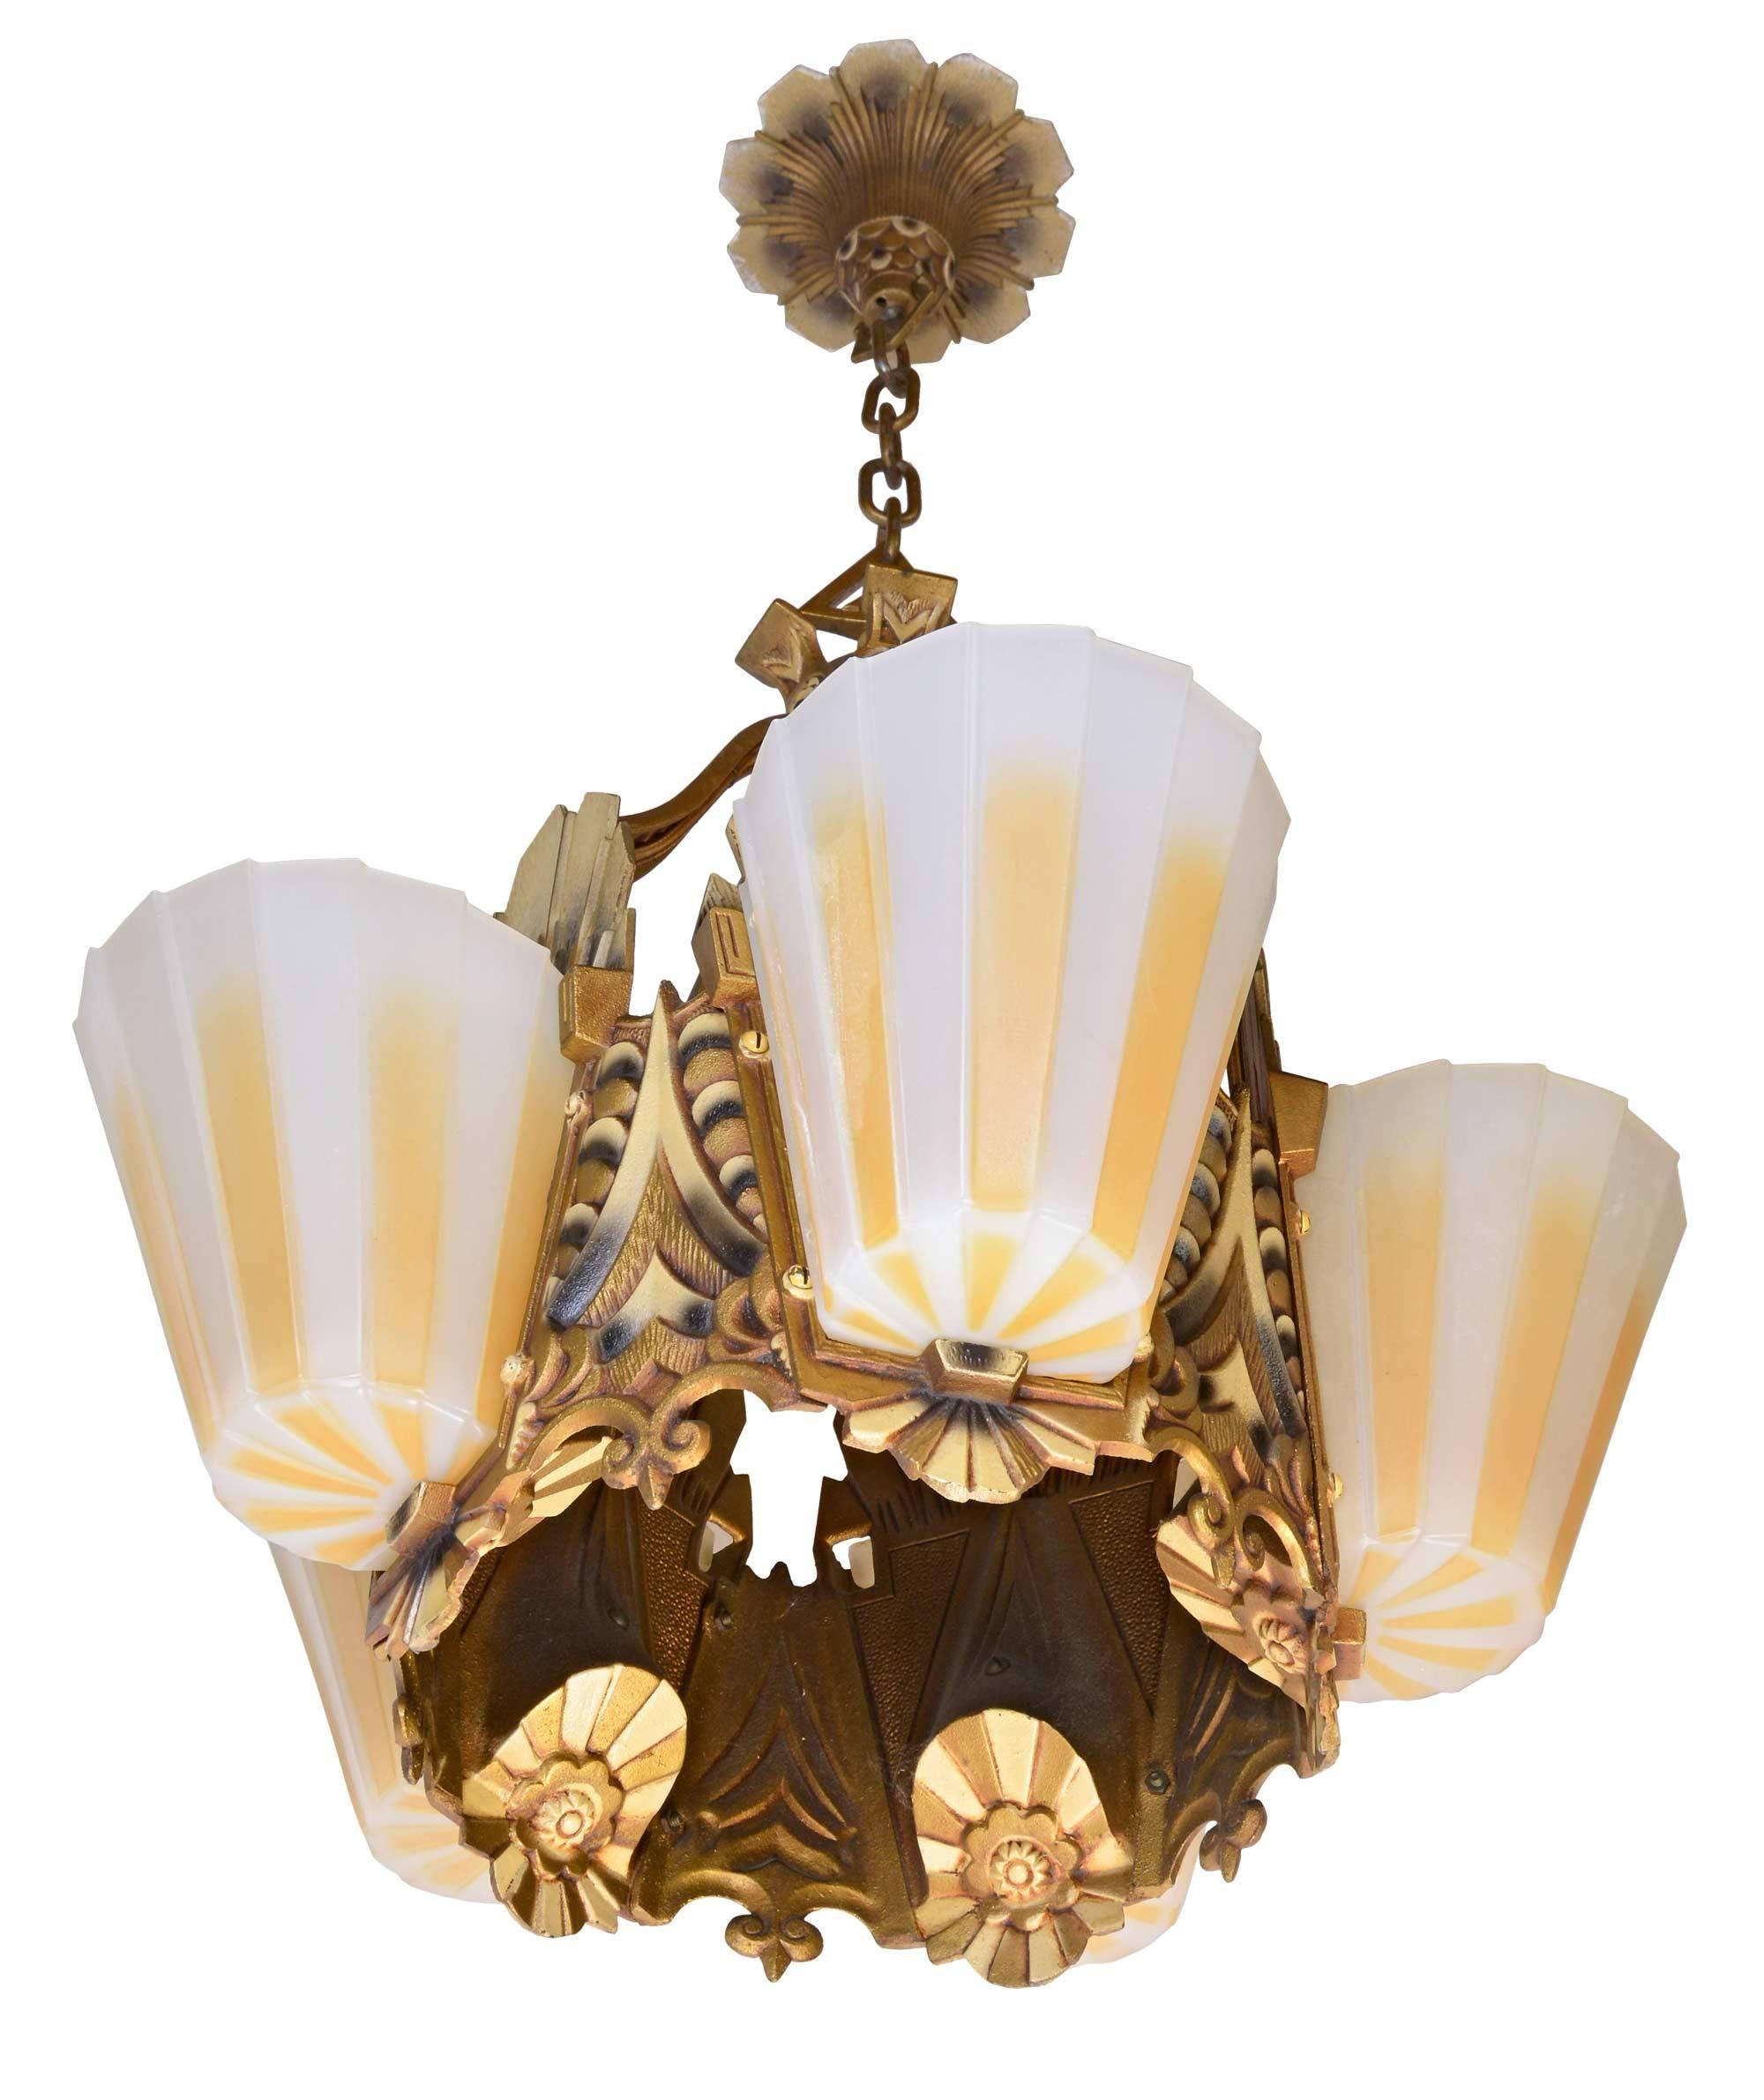 This iron, five-light slipper shade chandelier has an original polychrome finish and five striped slipper shades. Made by Williamson/Beardslee Manufacturing Co. of Chicago, IL, this fixture is full of geometric detail in keeping with the Art Deco